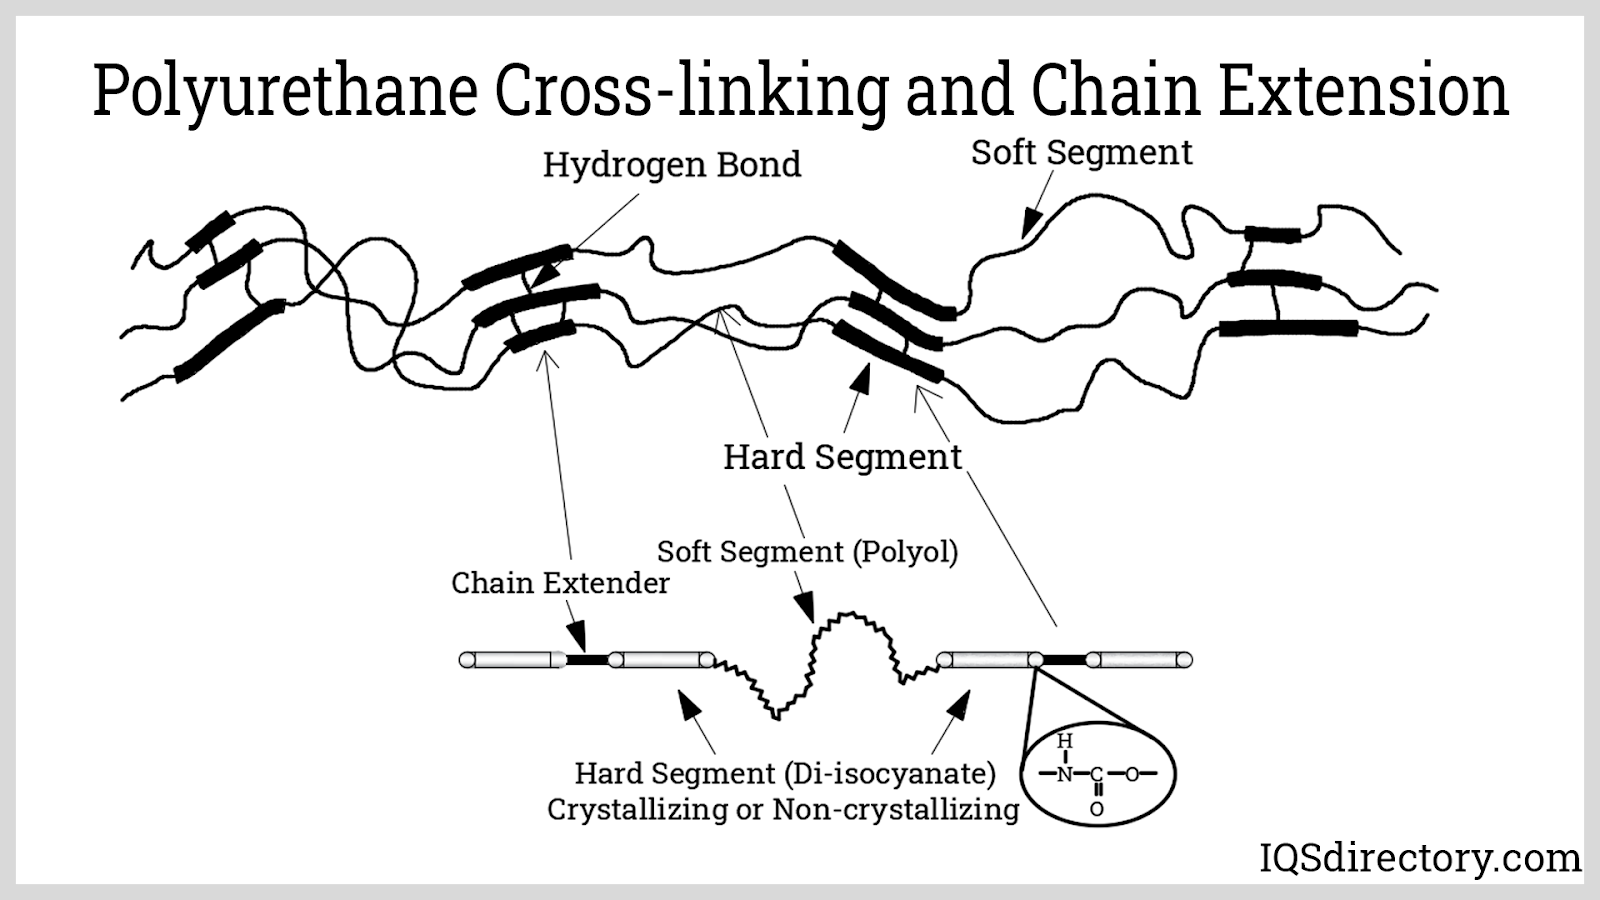 Polyurethane Cross-linking and Chain Extension